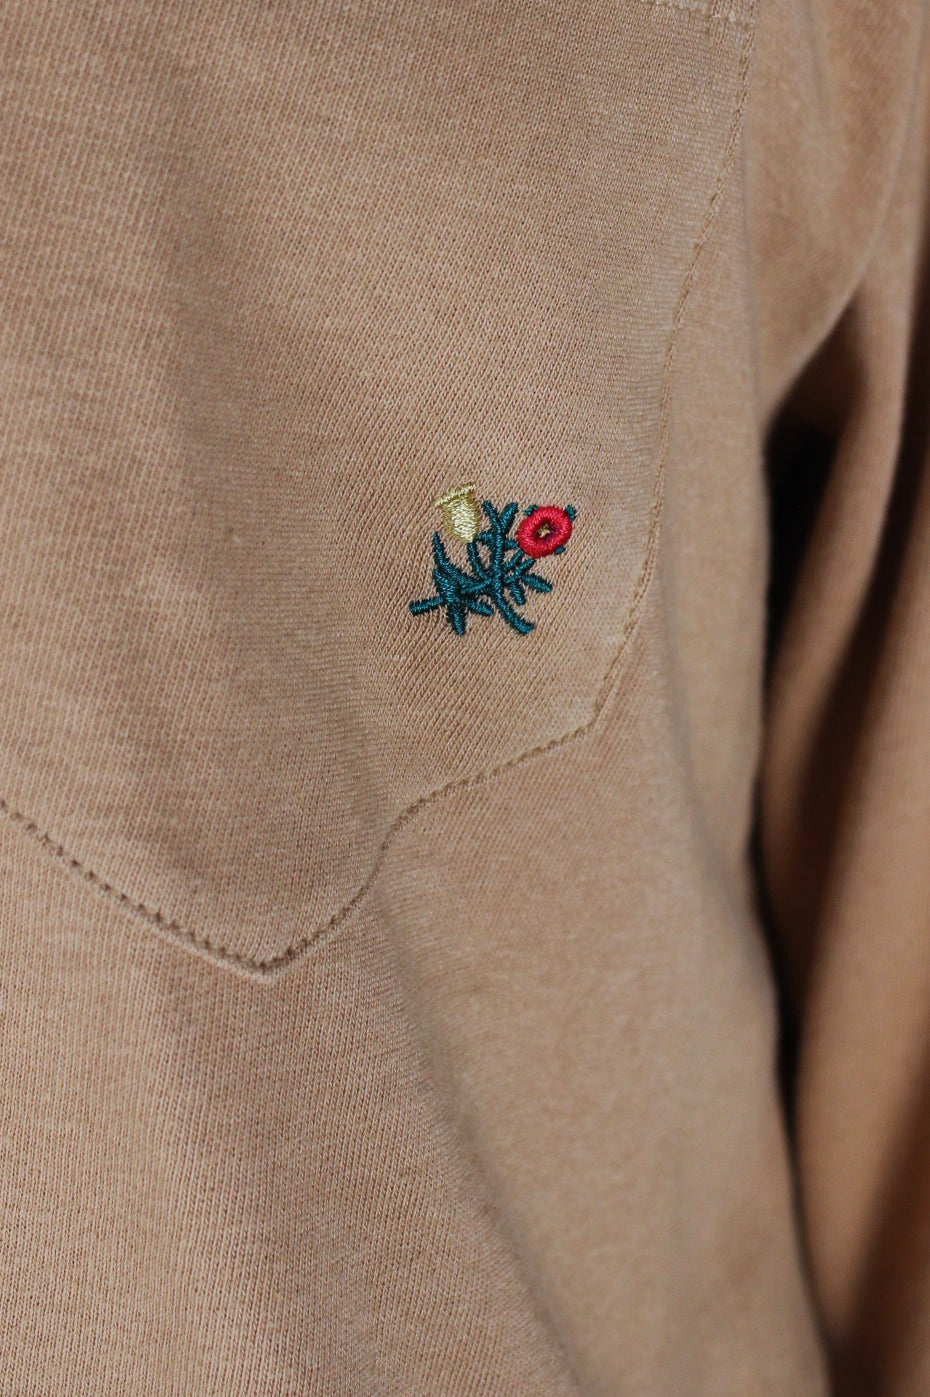 detail view of embroidery at left breast pocket of shirt.